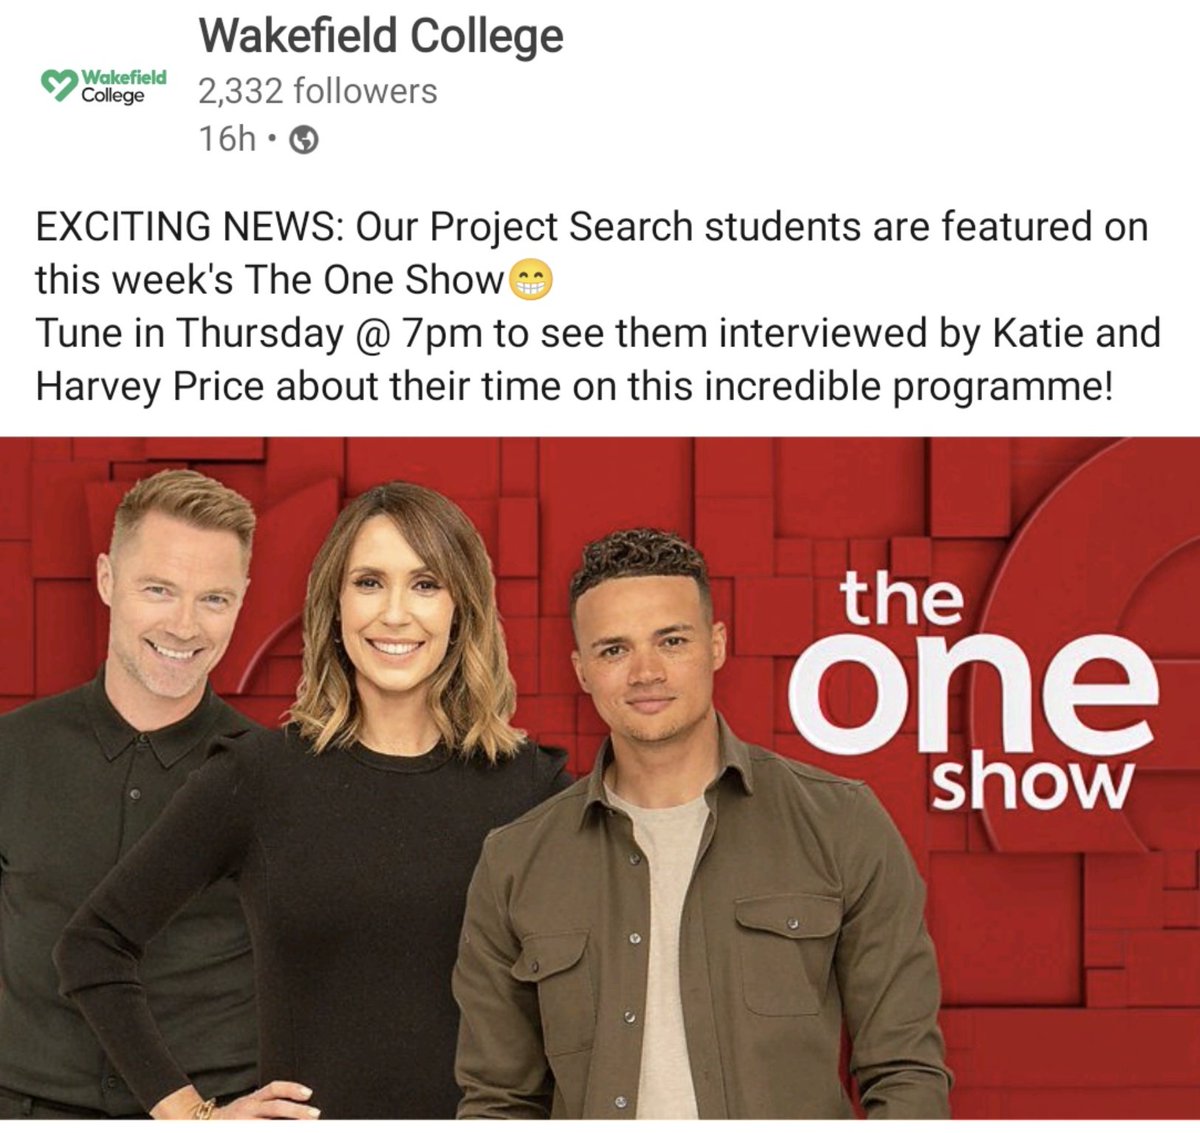 Make sure you are watching the @BBCTheOneShow tonight to see our interns in action @MidYorkshireNHS 

We know our young people can enrich the workplace ⭐

Thank you @KatiePrice and Harvey for shining a light on this pathway 🙏🏾
@wakeycollege @P_SEARCH_MYT @dfnsearch @Hftonline